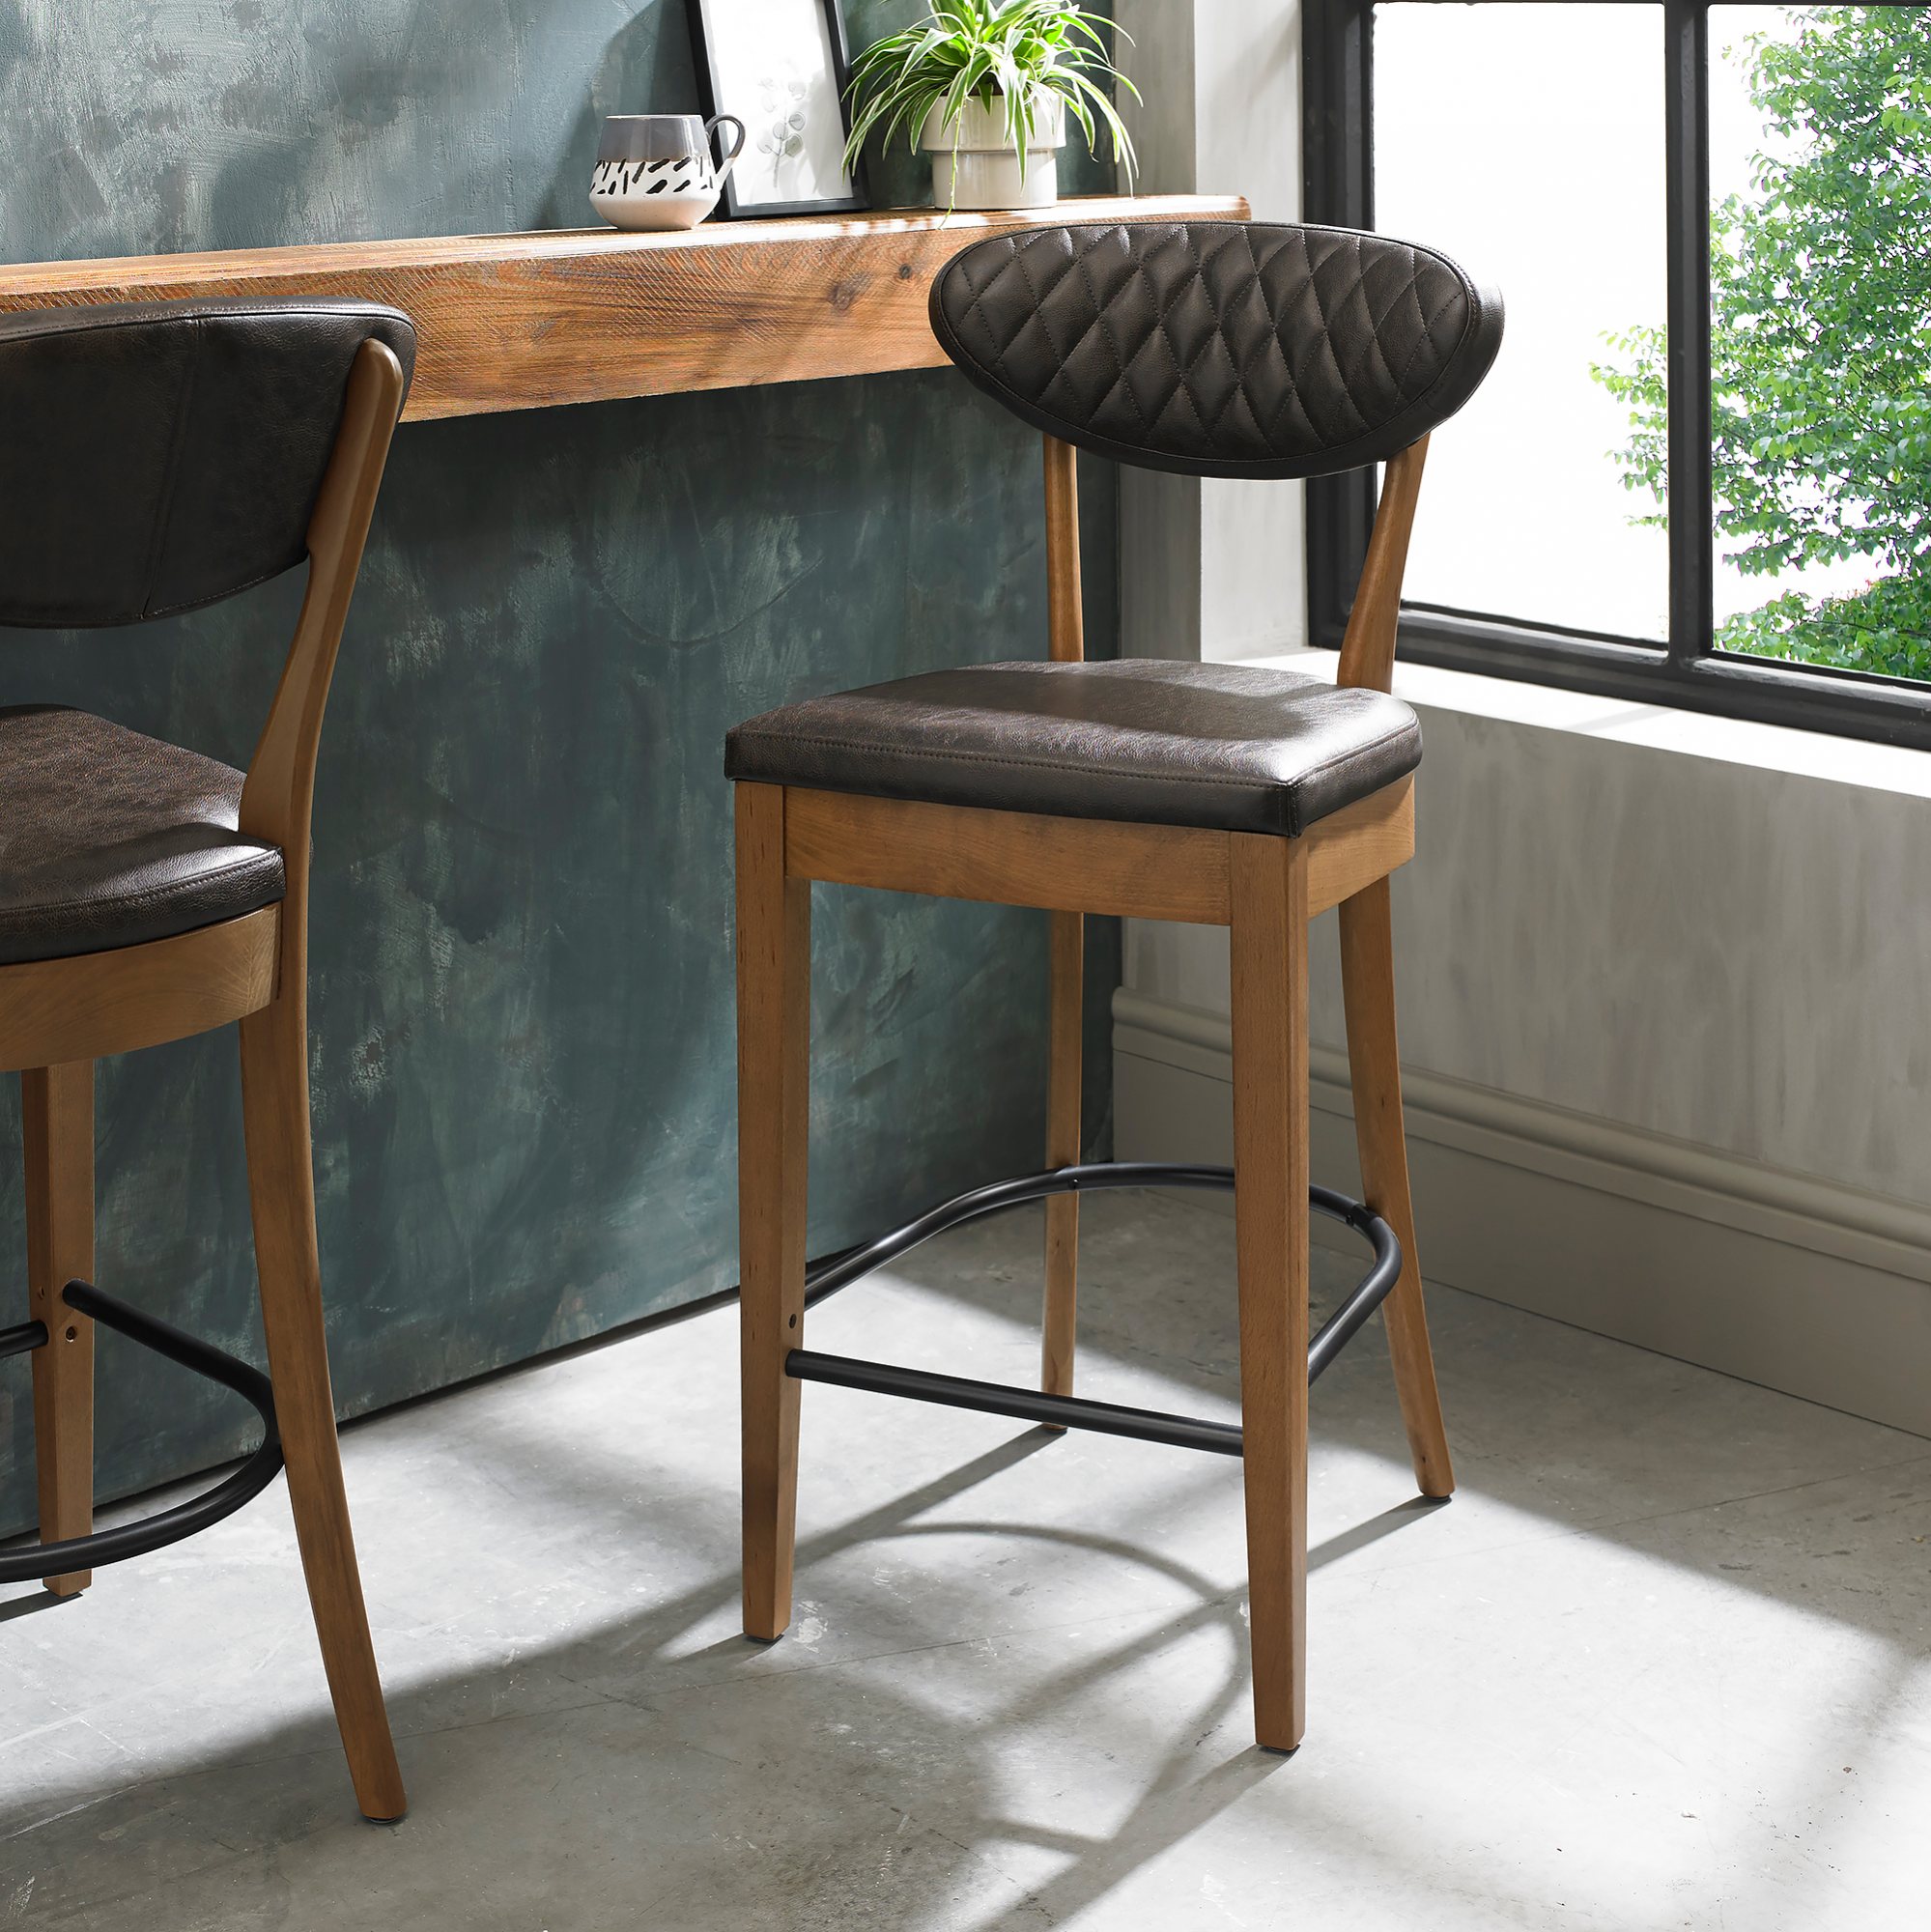 Home Origins Bosco Rustic Oak Upholstered Bar Stool- Old West Vintage Fabric- Feature